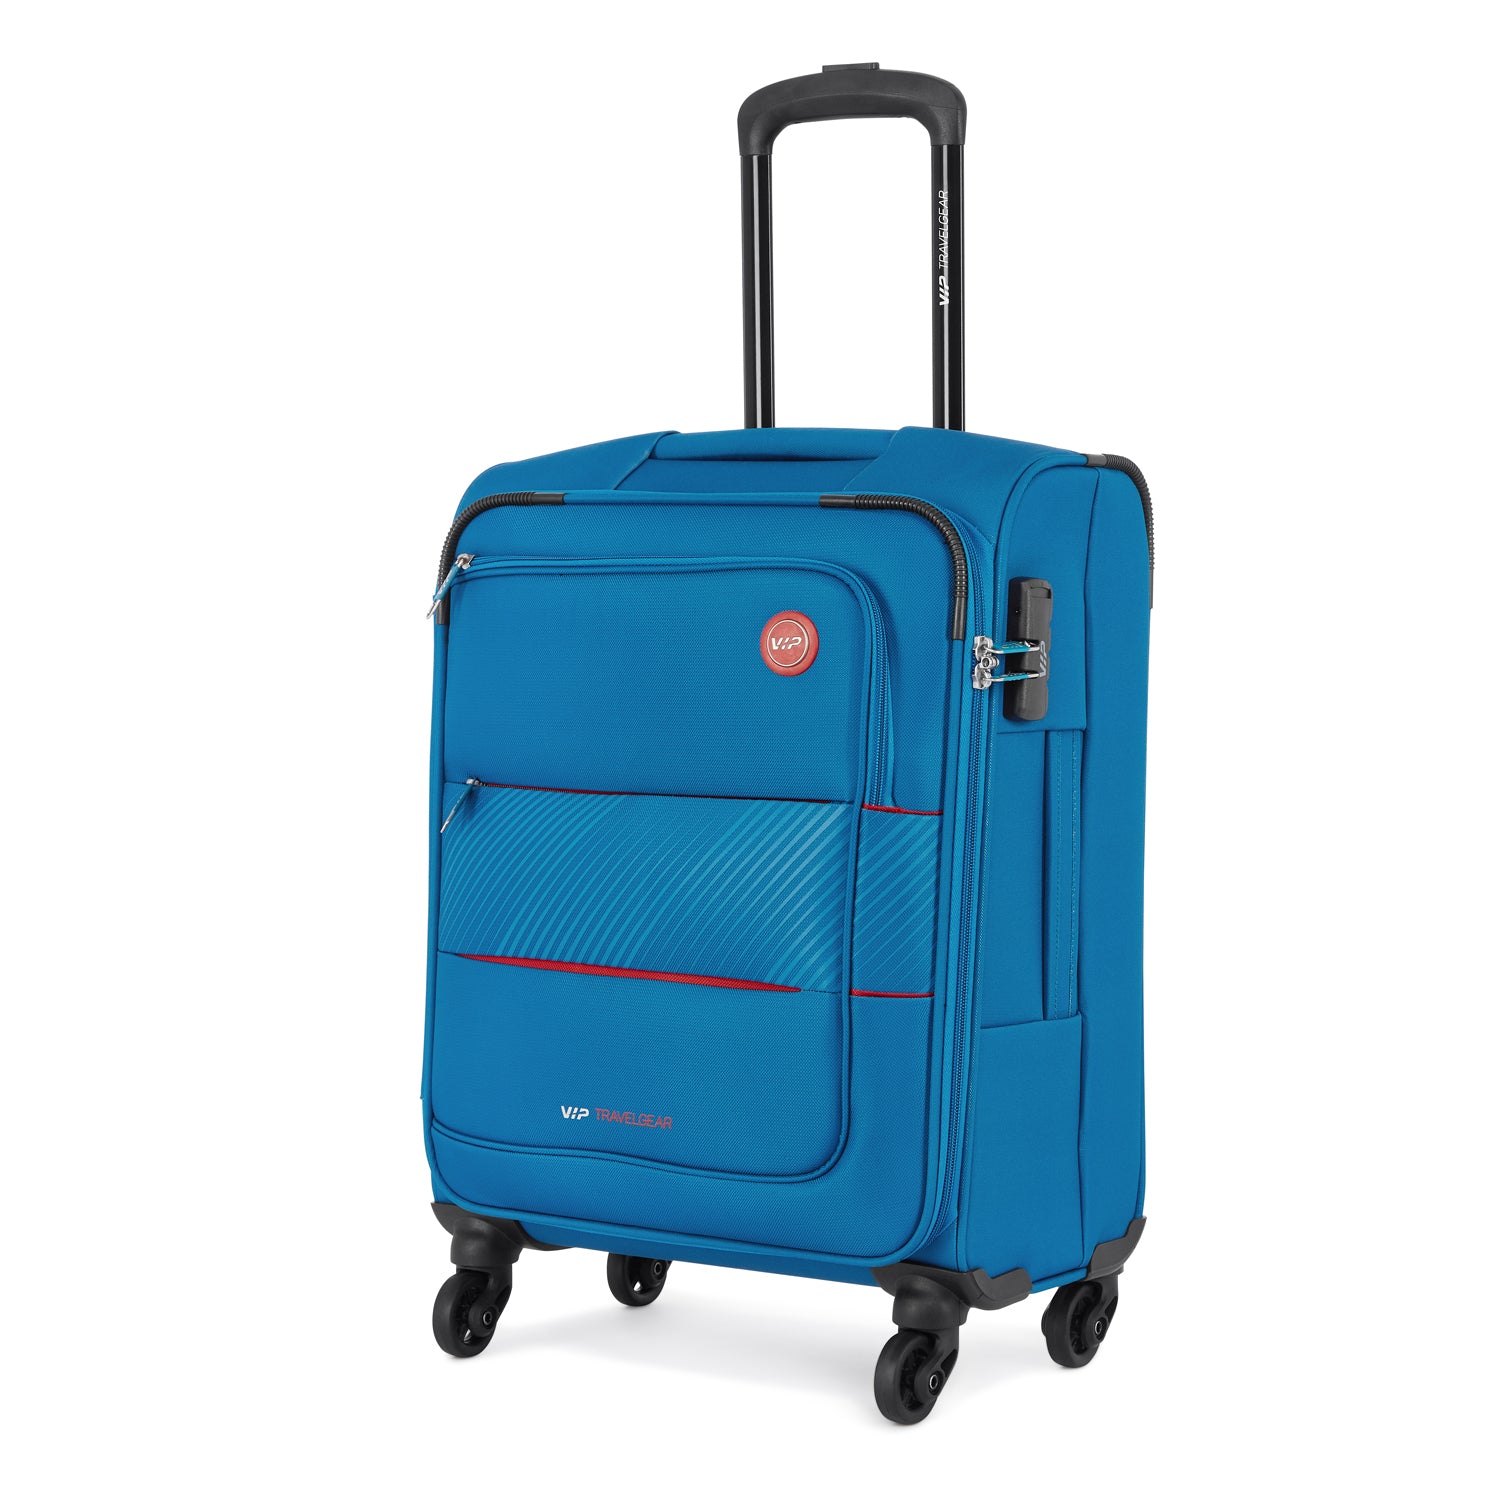 Blue Trolley Luggage Bag Isolated on White Background. Vip Trolley Bag. Trolley  Travel Bag. Spinner Trunk Stock Photo